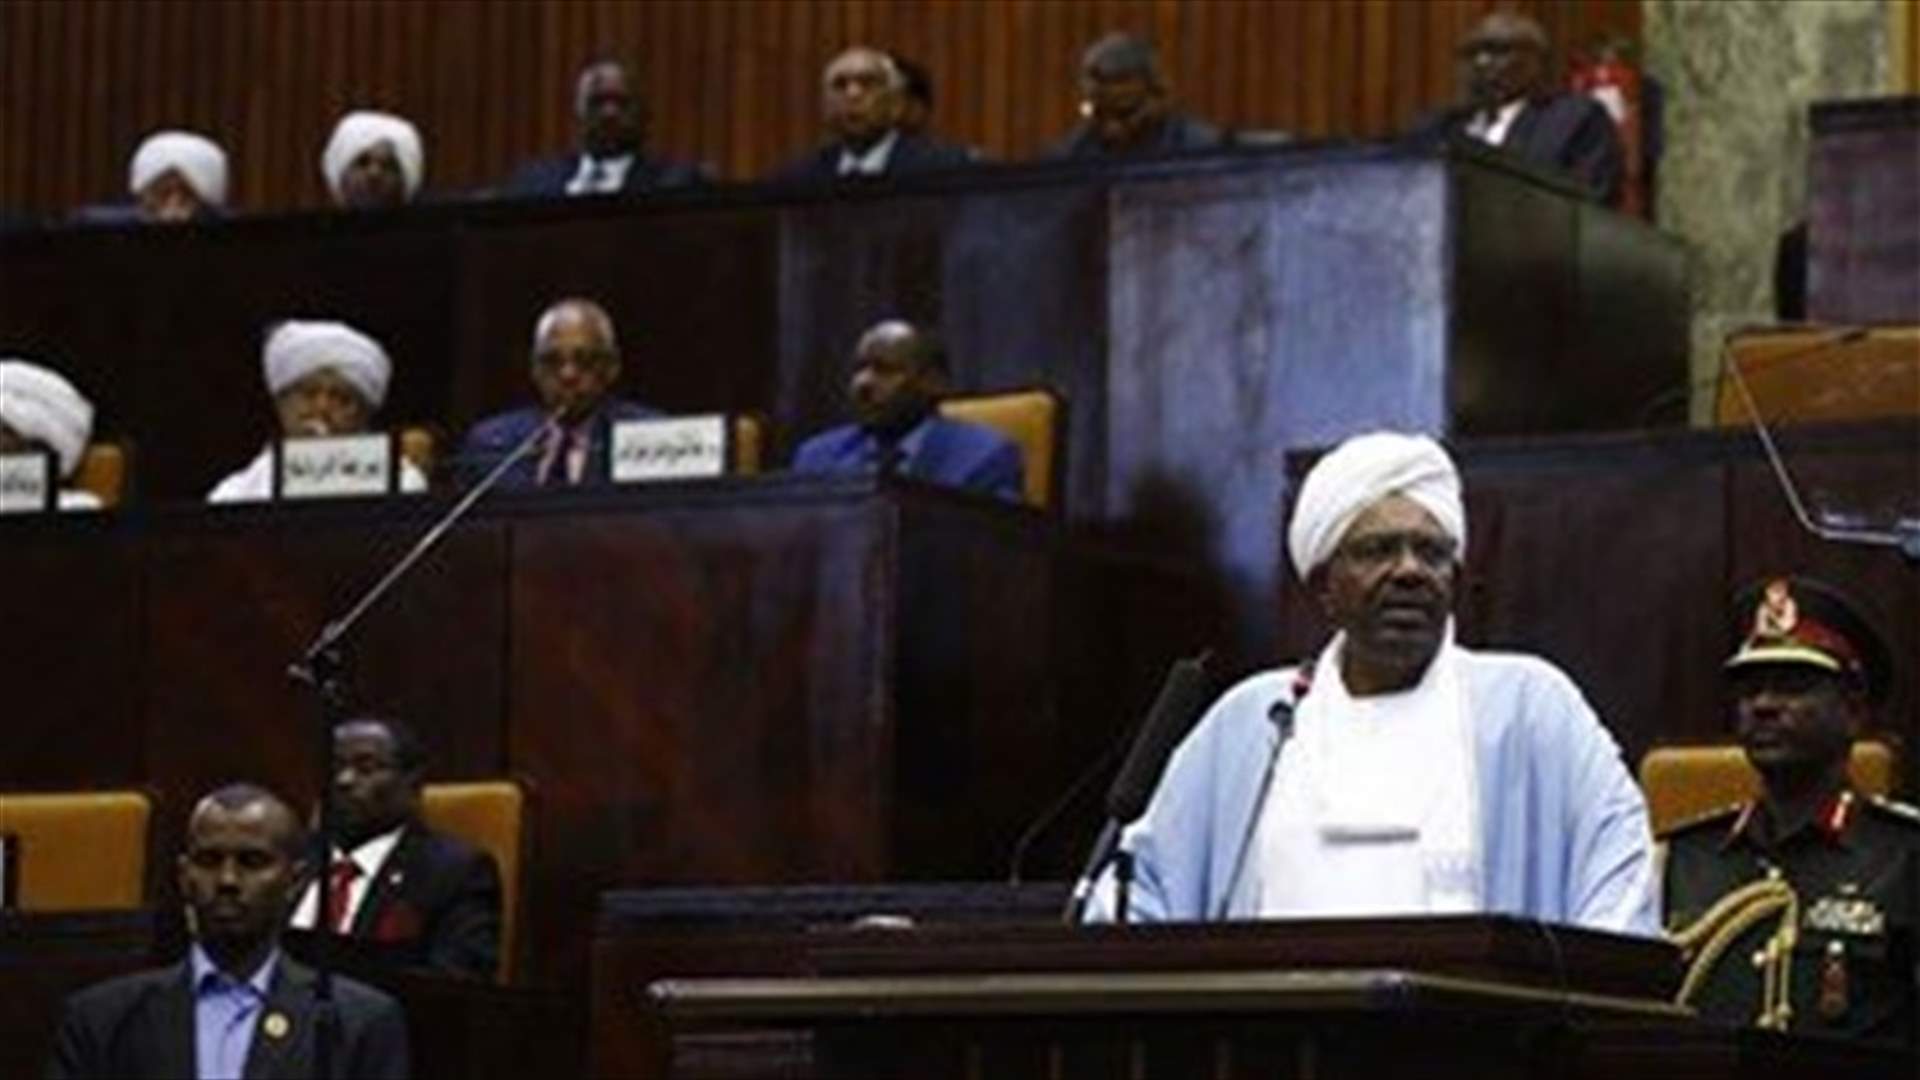 Former Sudan president Bashir sentenced to two years in detention for corruption